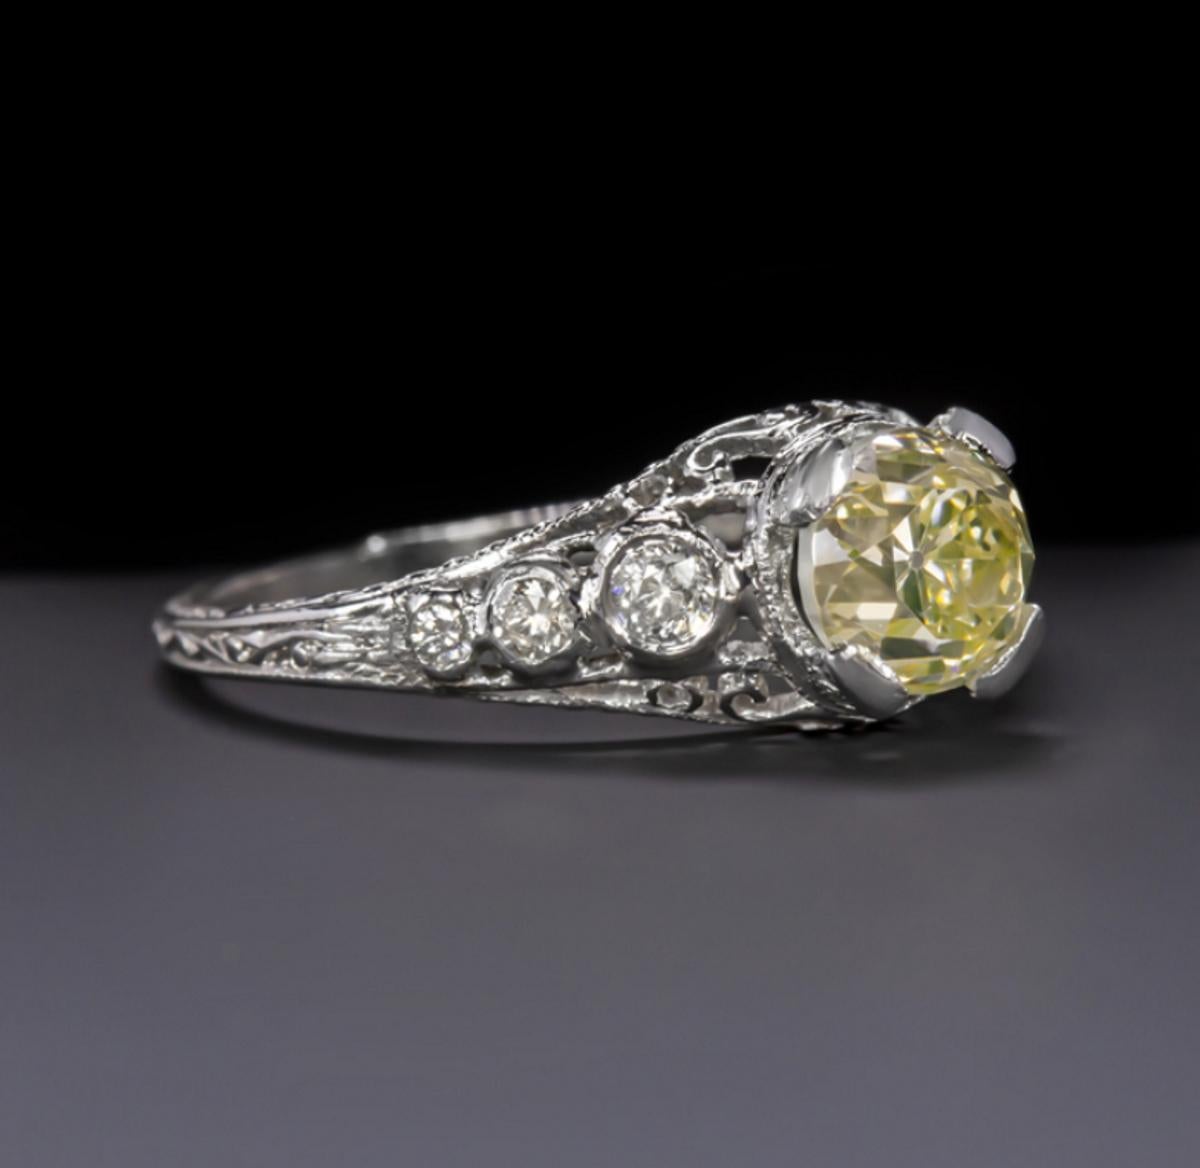 This romantic and timelessly designed original vintage ring showcases a lively and completely eye clean old European cut diamond in an intricate diamond studded platinum setting. The 1.09ct GIA certified diamond has a cheery bright yellow hue and